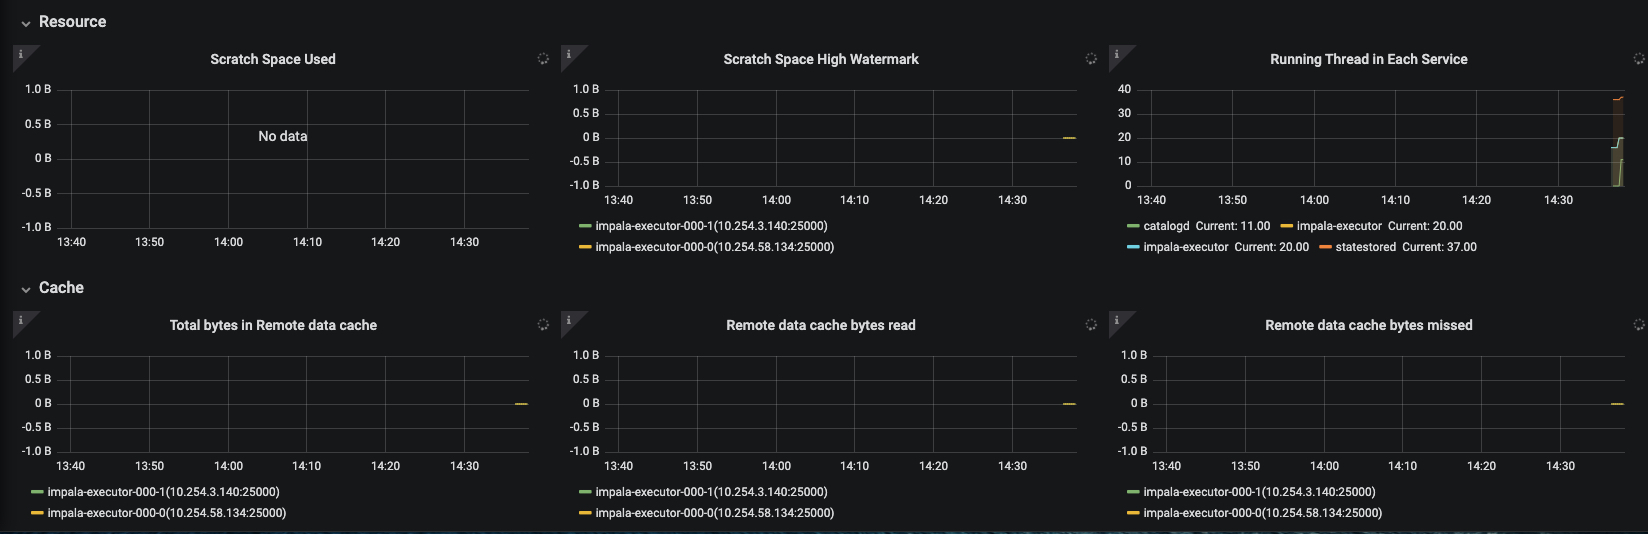 Grafana dashboard for Impala Virtual Warehouse showing graphs for scratch and space utilization.